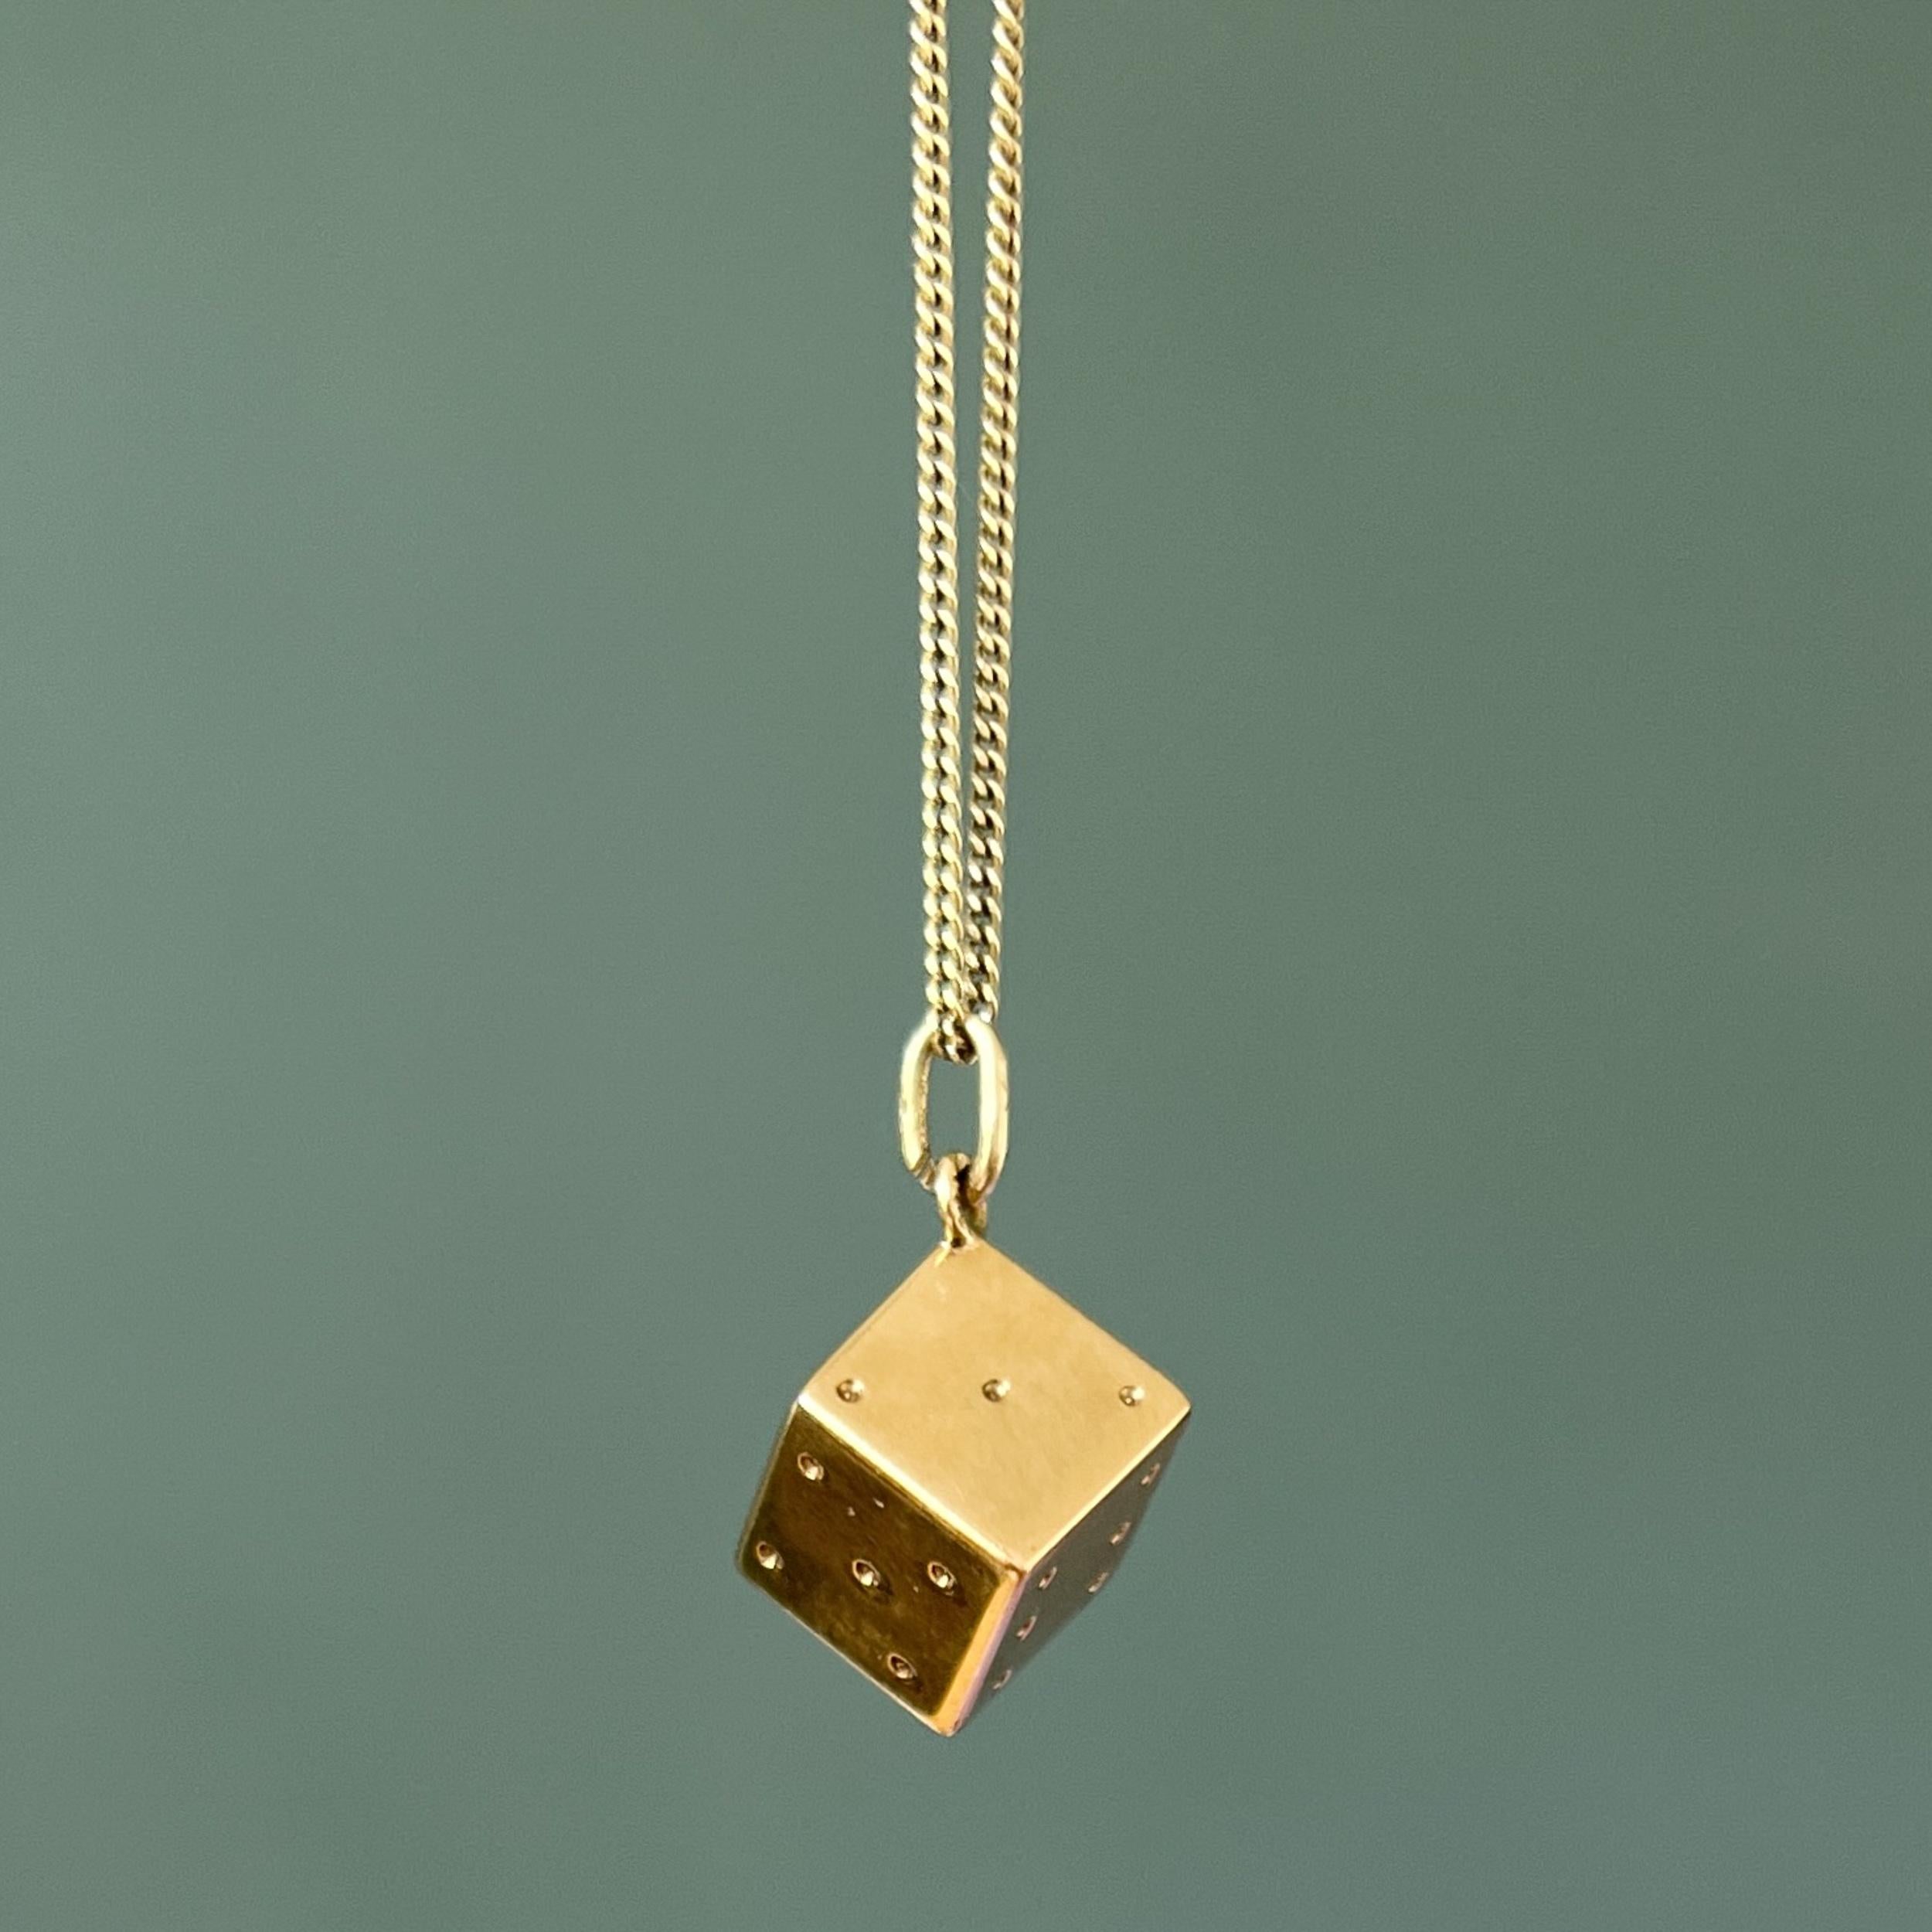 A three-dimensional vintage dice lucky charm pendant. The charm is beautifully stylized and crafted in 14 karat gold. Charms are great to collect as wearable memories, it has a symbolic and often a sentimental value. They can be added to your